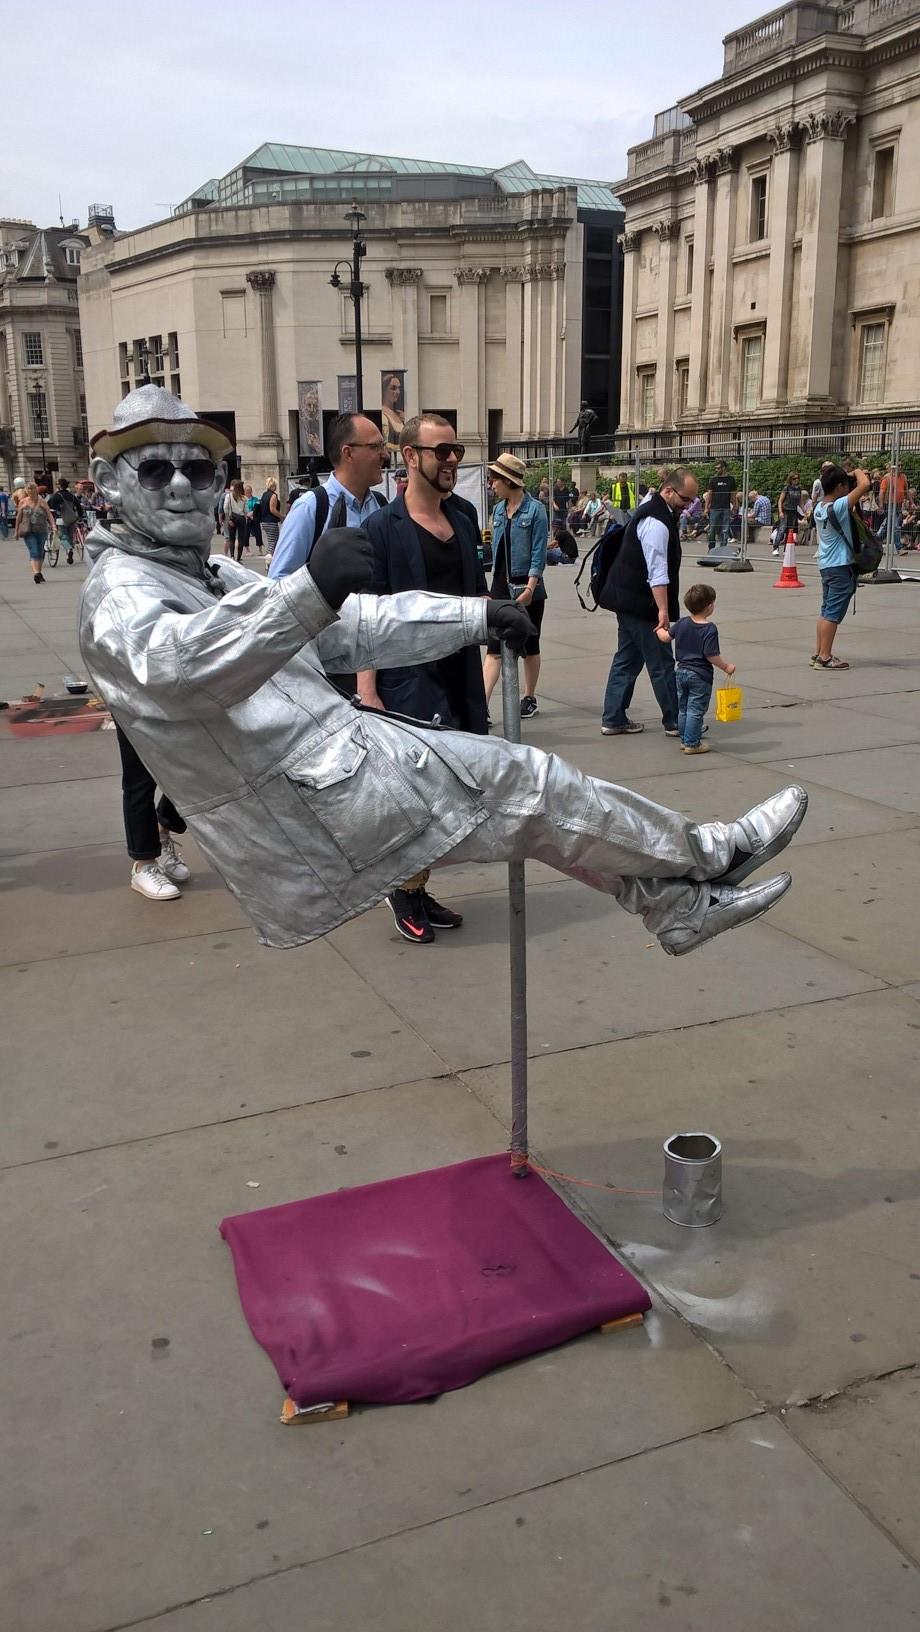 Just another day in Trafalgar Square 
Picture: NATHAN PEARCE